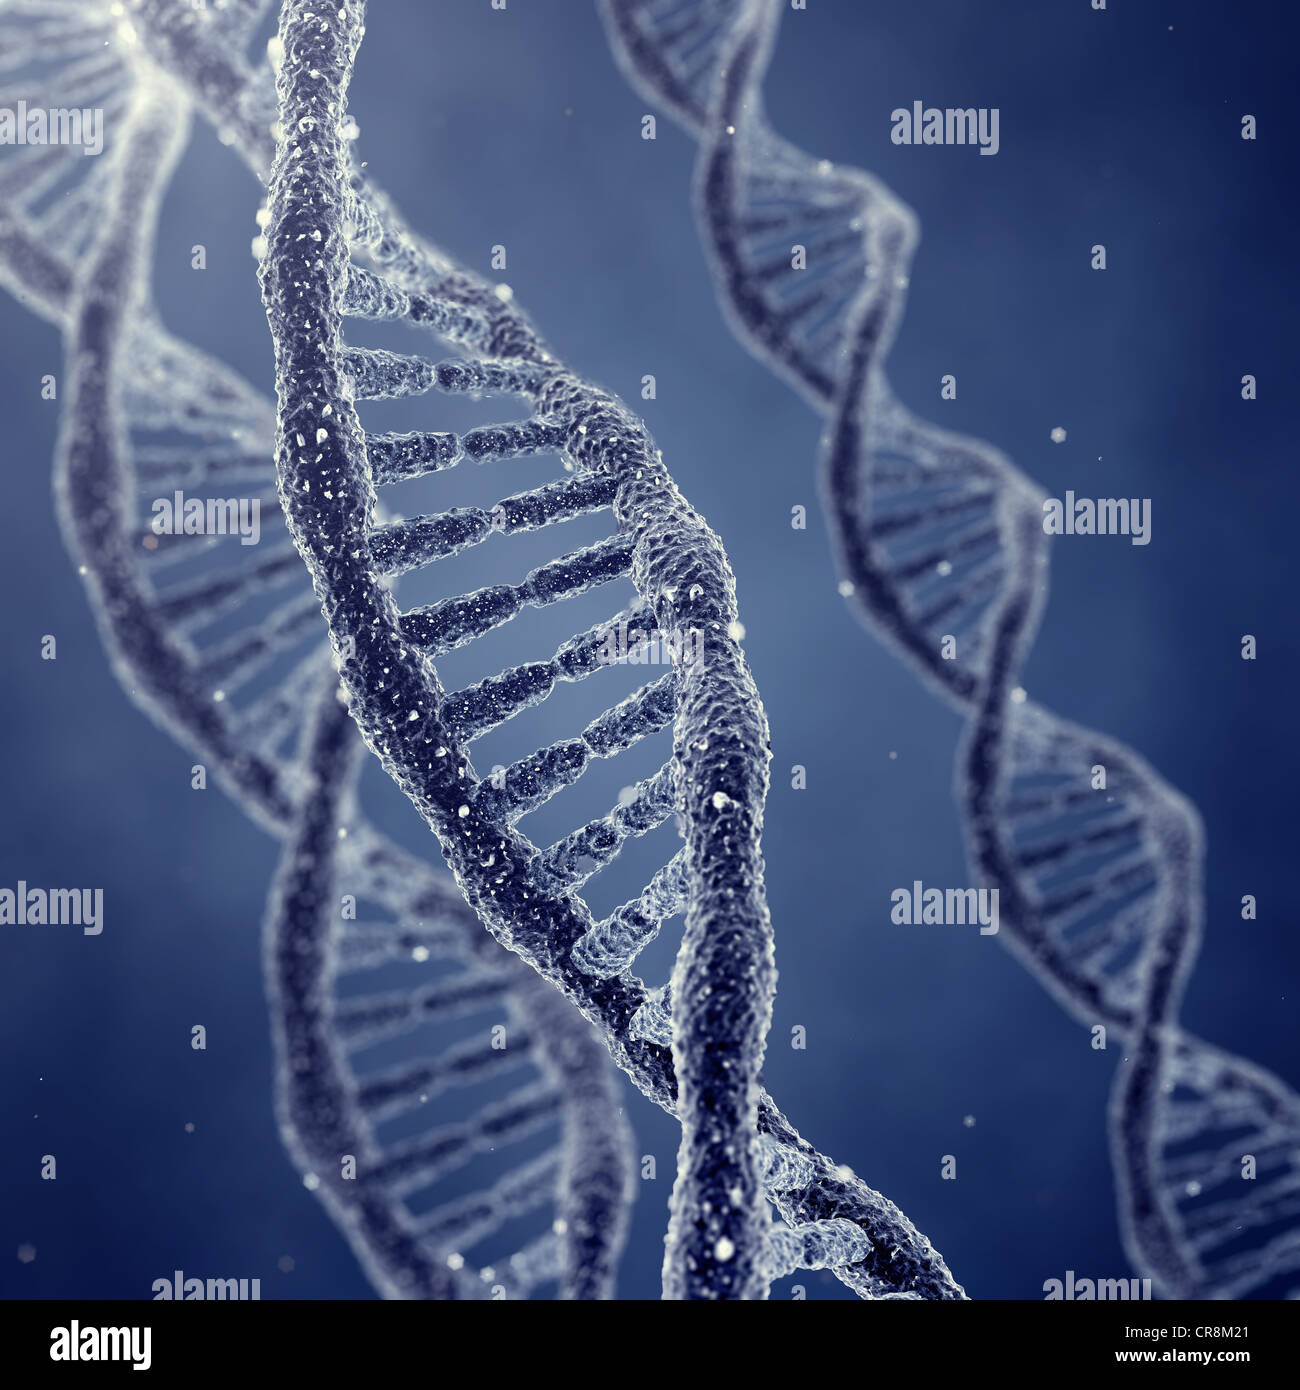 Dna double helix molecules and chromosomes Stock Photo